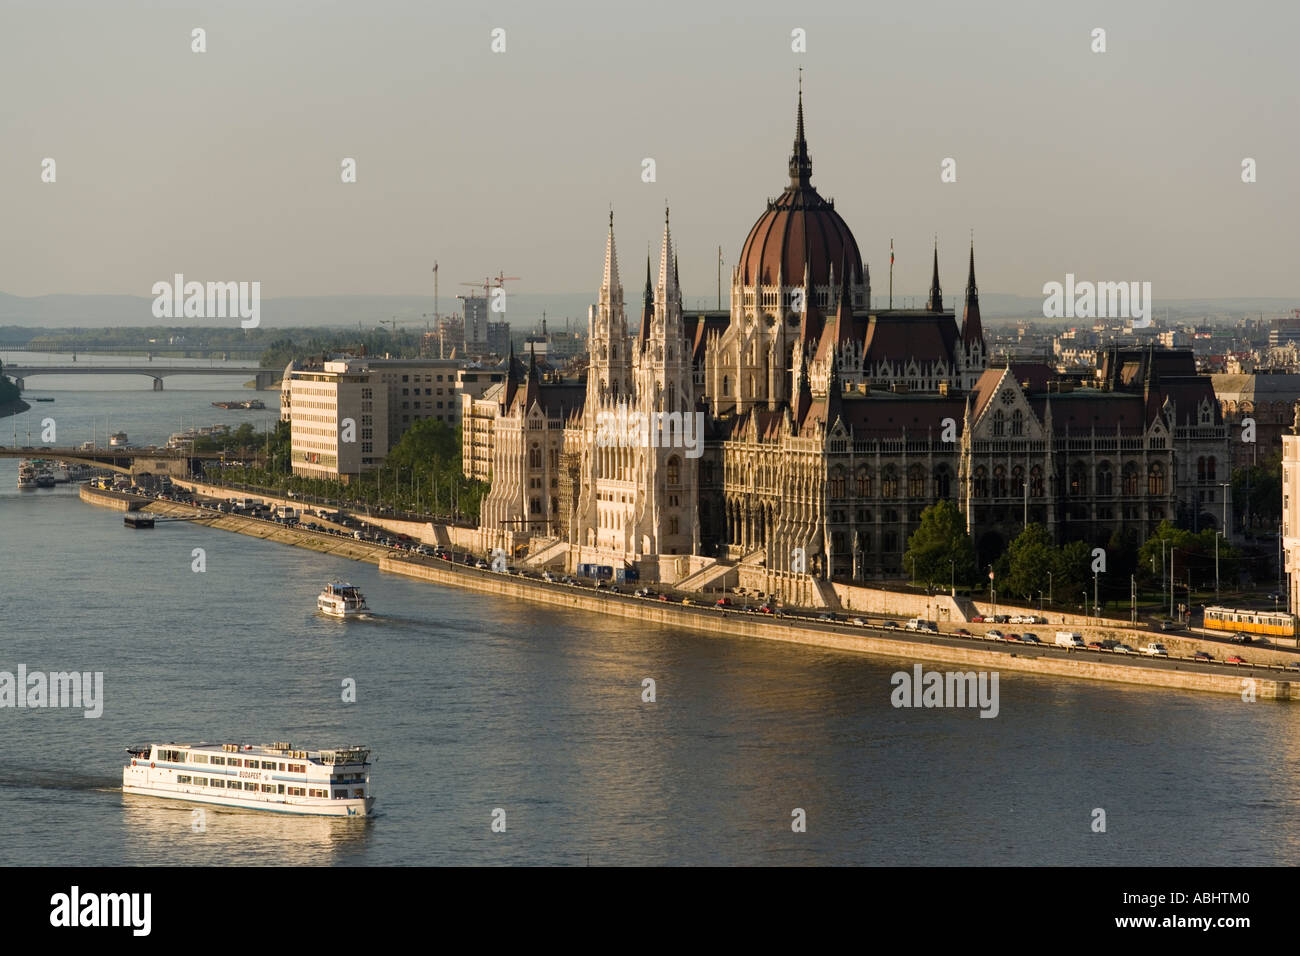 View over the Danube river with boats to the Parliament Pest Budapest Hungary Stock Photo